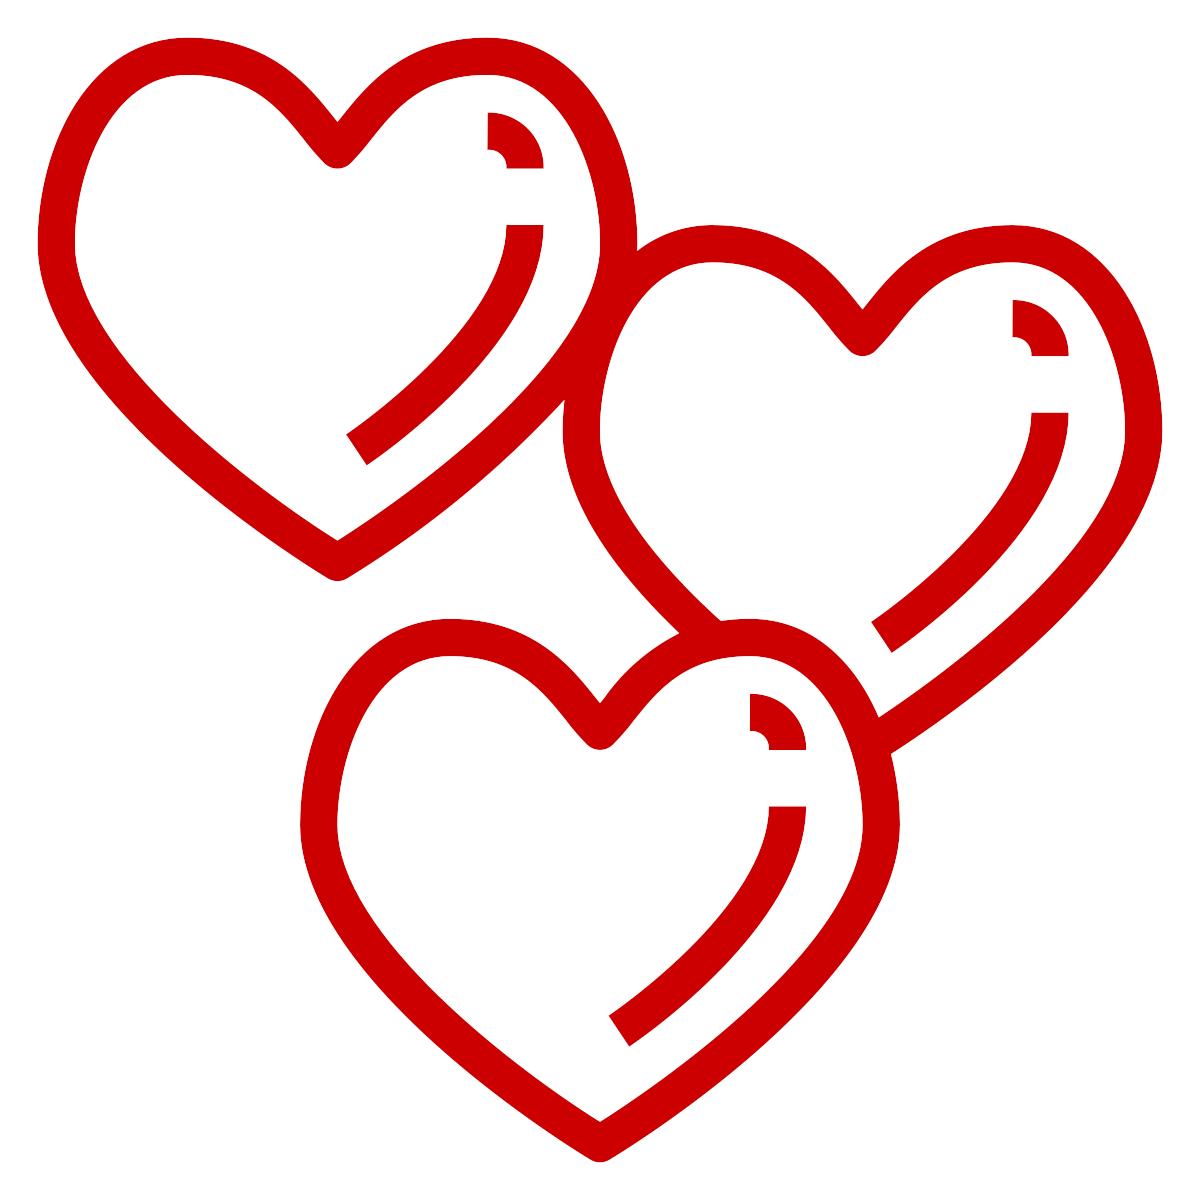 On this Valentine's day, check out our #free patient page on #statins to learn why they are important for keeping your heart (and all other blood vessels) healthy journals.sagepub.com/doi/full/10.11… @evratchford